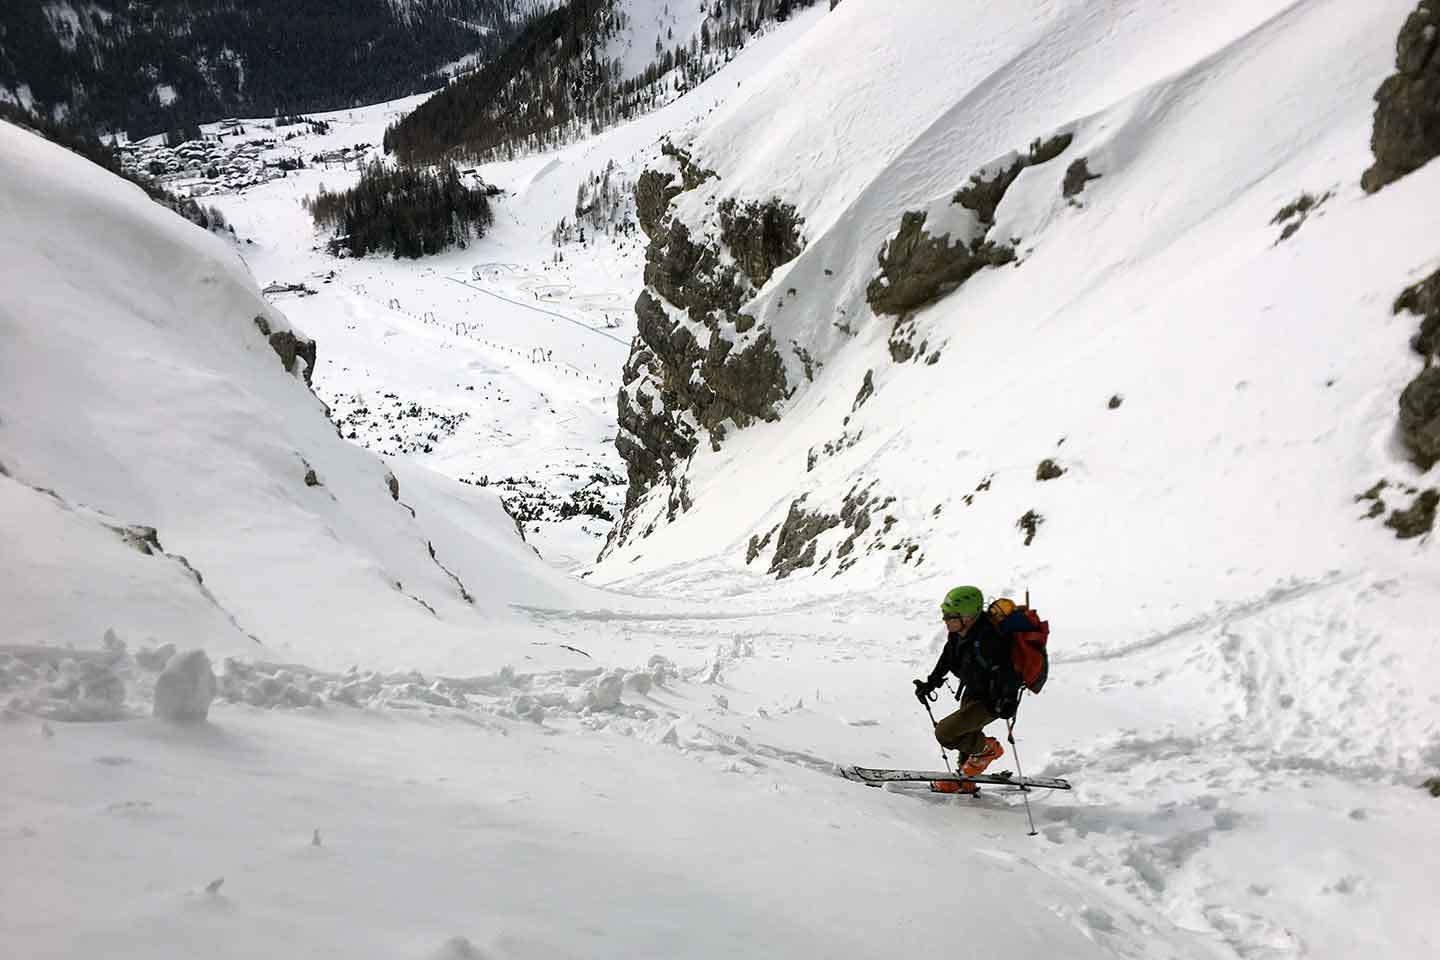 Ski Mountaineering in Sassongher to Val Scura